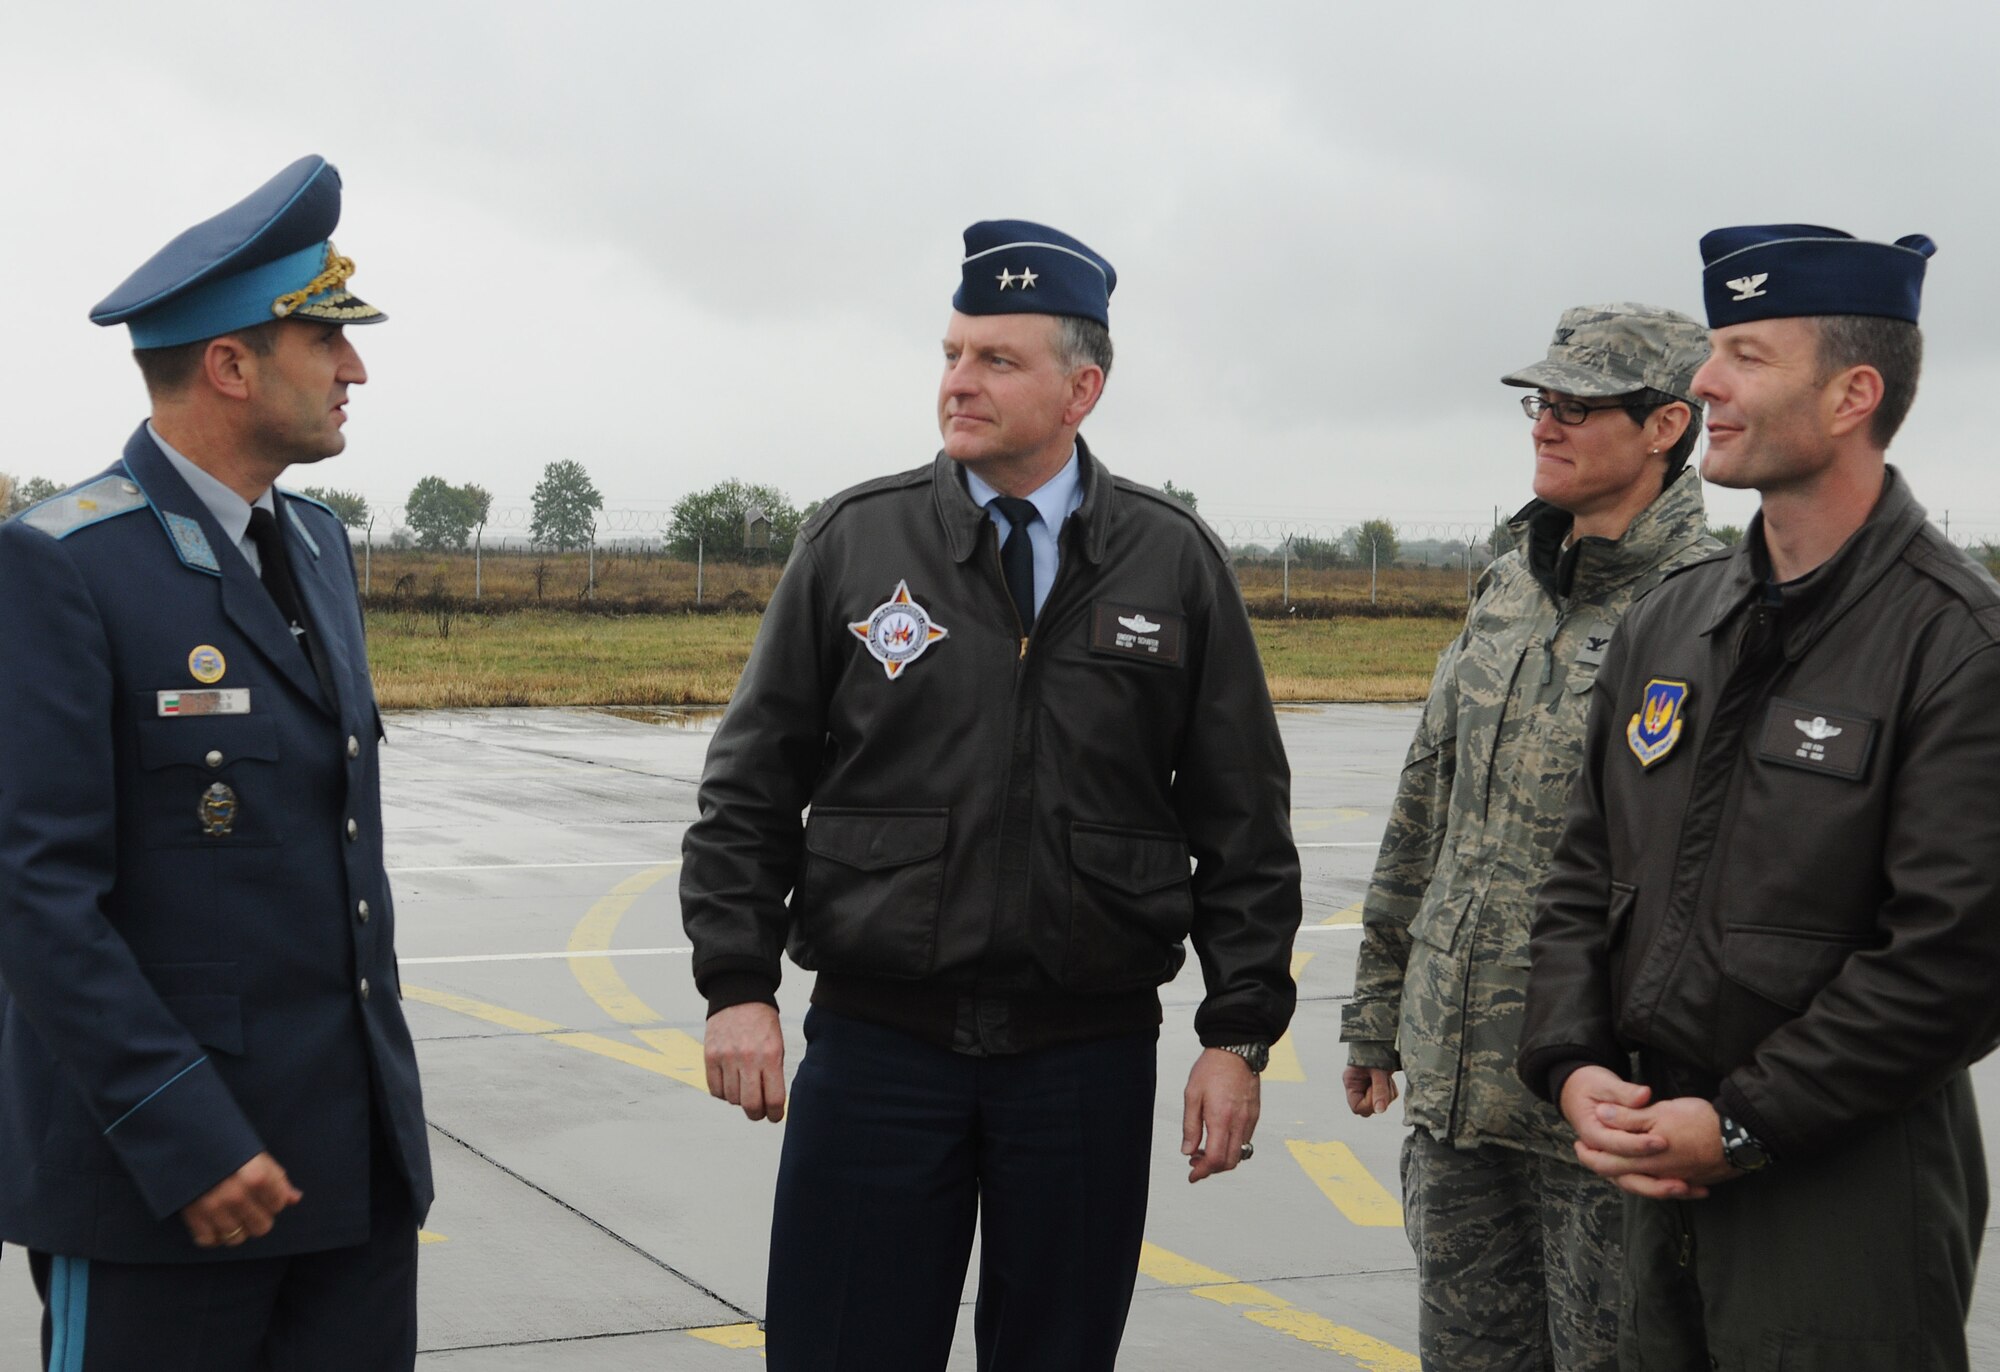 GRAF IGNATIEVO AIR FORCE BASE, Bulgaria - Brig. Gen. Rumen Radev, left, Bulgarian air force deputy commander; Col. Jackson Fox, far right, 52nd Operations Group commander; and Col. Jodine Tooke, right, 52nd Mission Support Group commander, greet Maj. Gen. Paul G. Schafer, U.S. European Command plans and policy director, as he arrives at Graf Ignatievo Air Force Base during Operation Thracian Star Oct. 14. The operation was a three-week, combined exercise that gave the U.S. and Bulgarian Air Forces the opportunity to share ideas and train together. (U.S. Air Force photo/Staff Sgt. Benjamin Wilson)